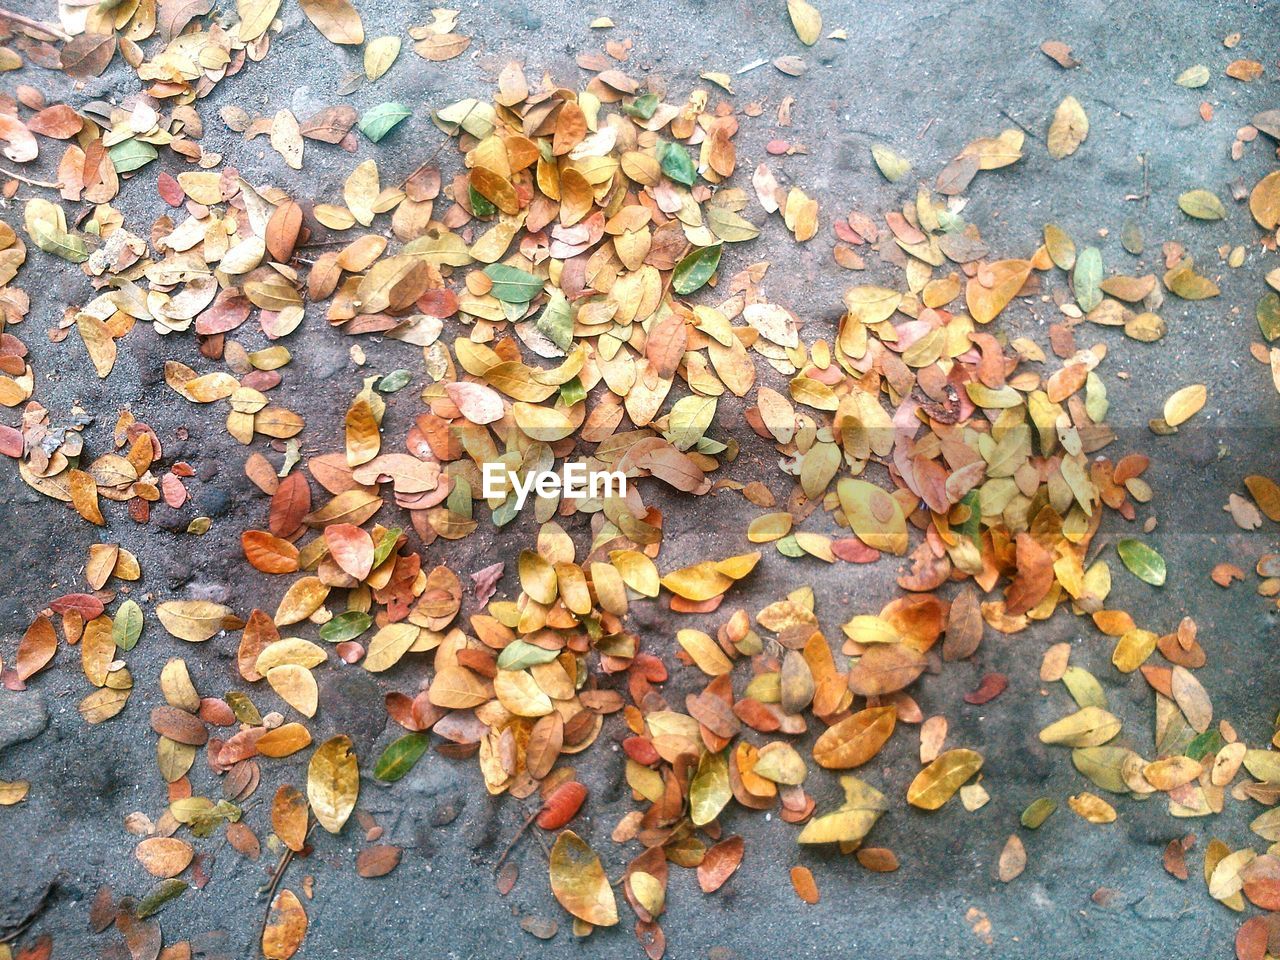 Close-up of autumnal leaves on ground